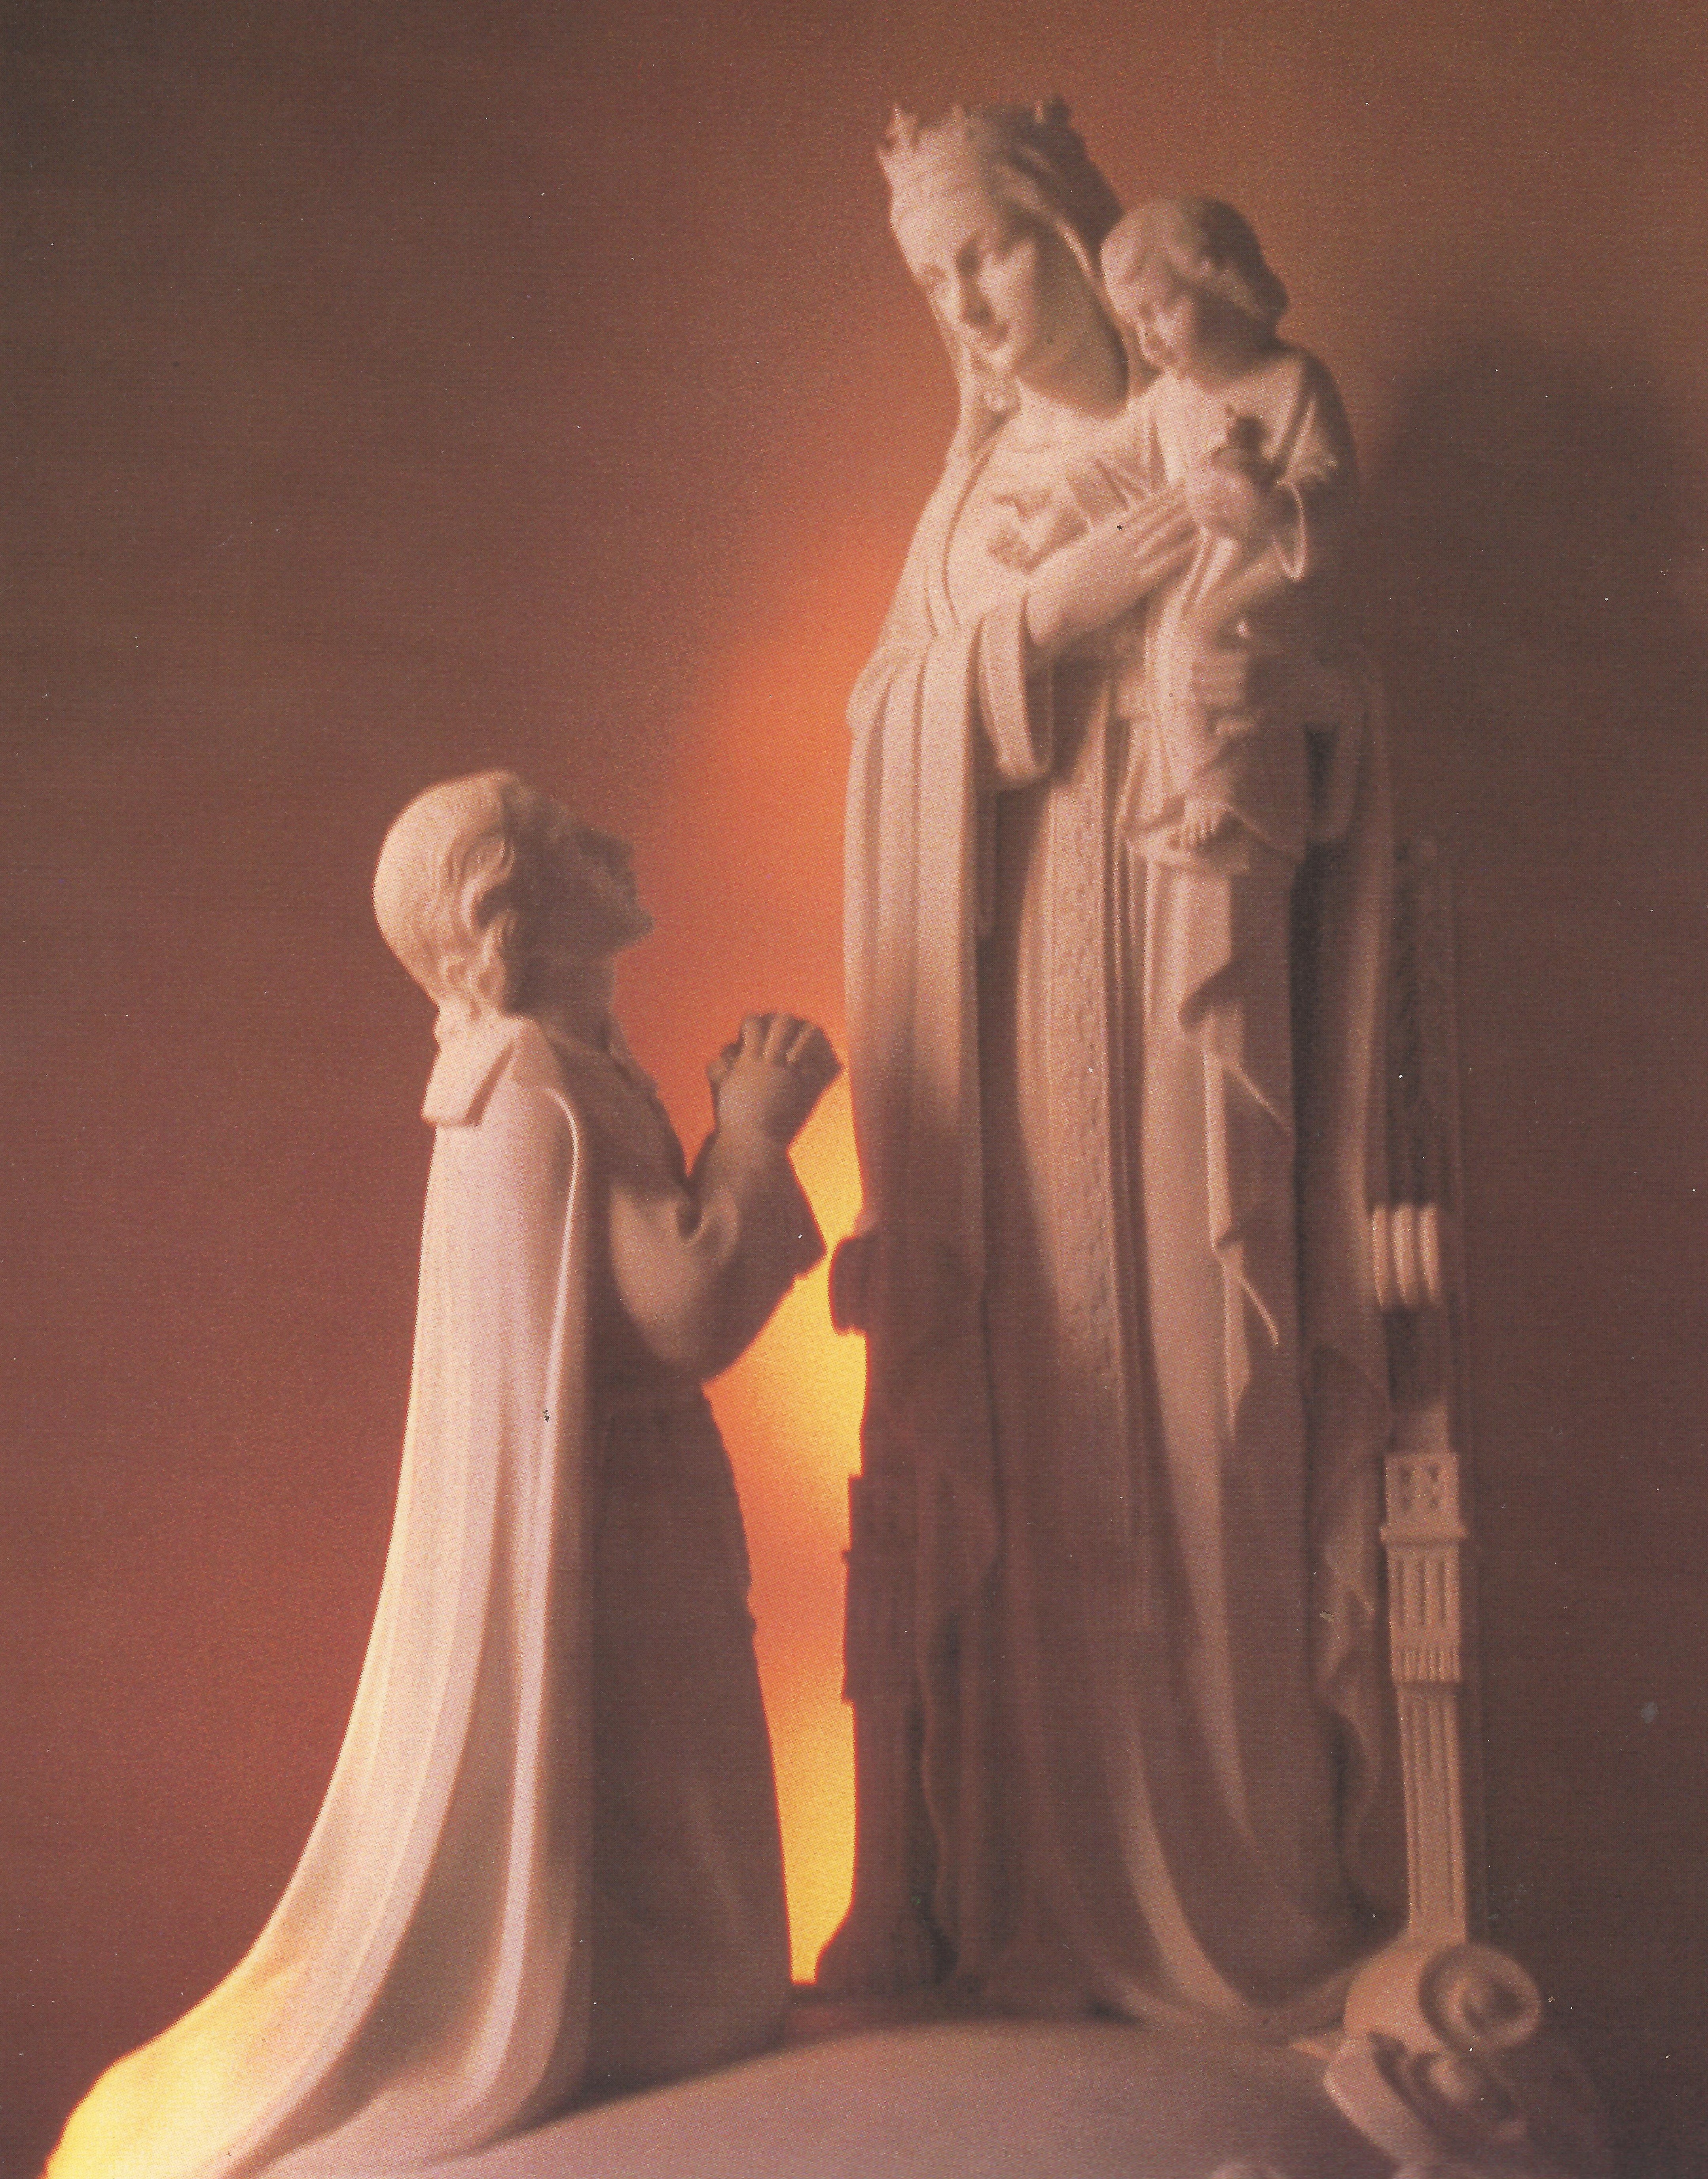 Q&A: Is Total Consecration Directed to Jesus or to Mary?